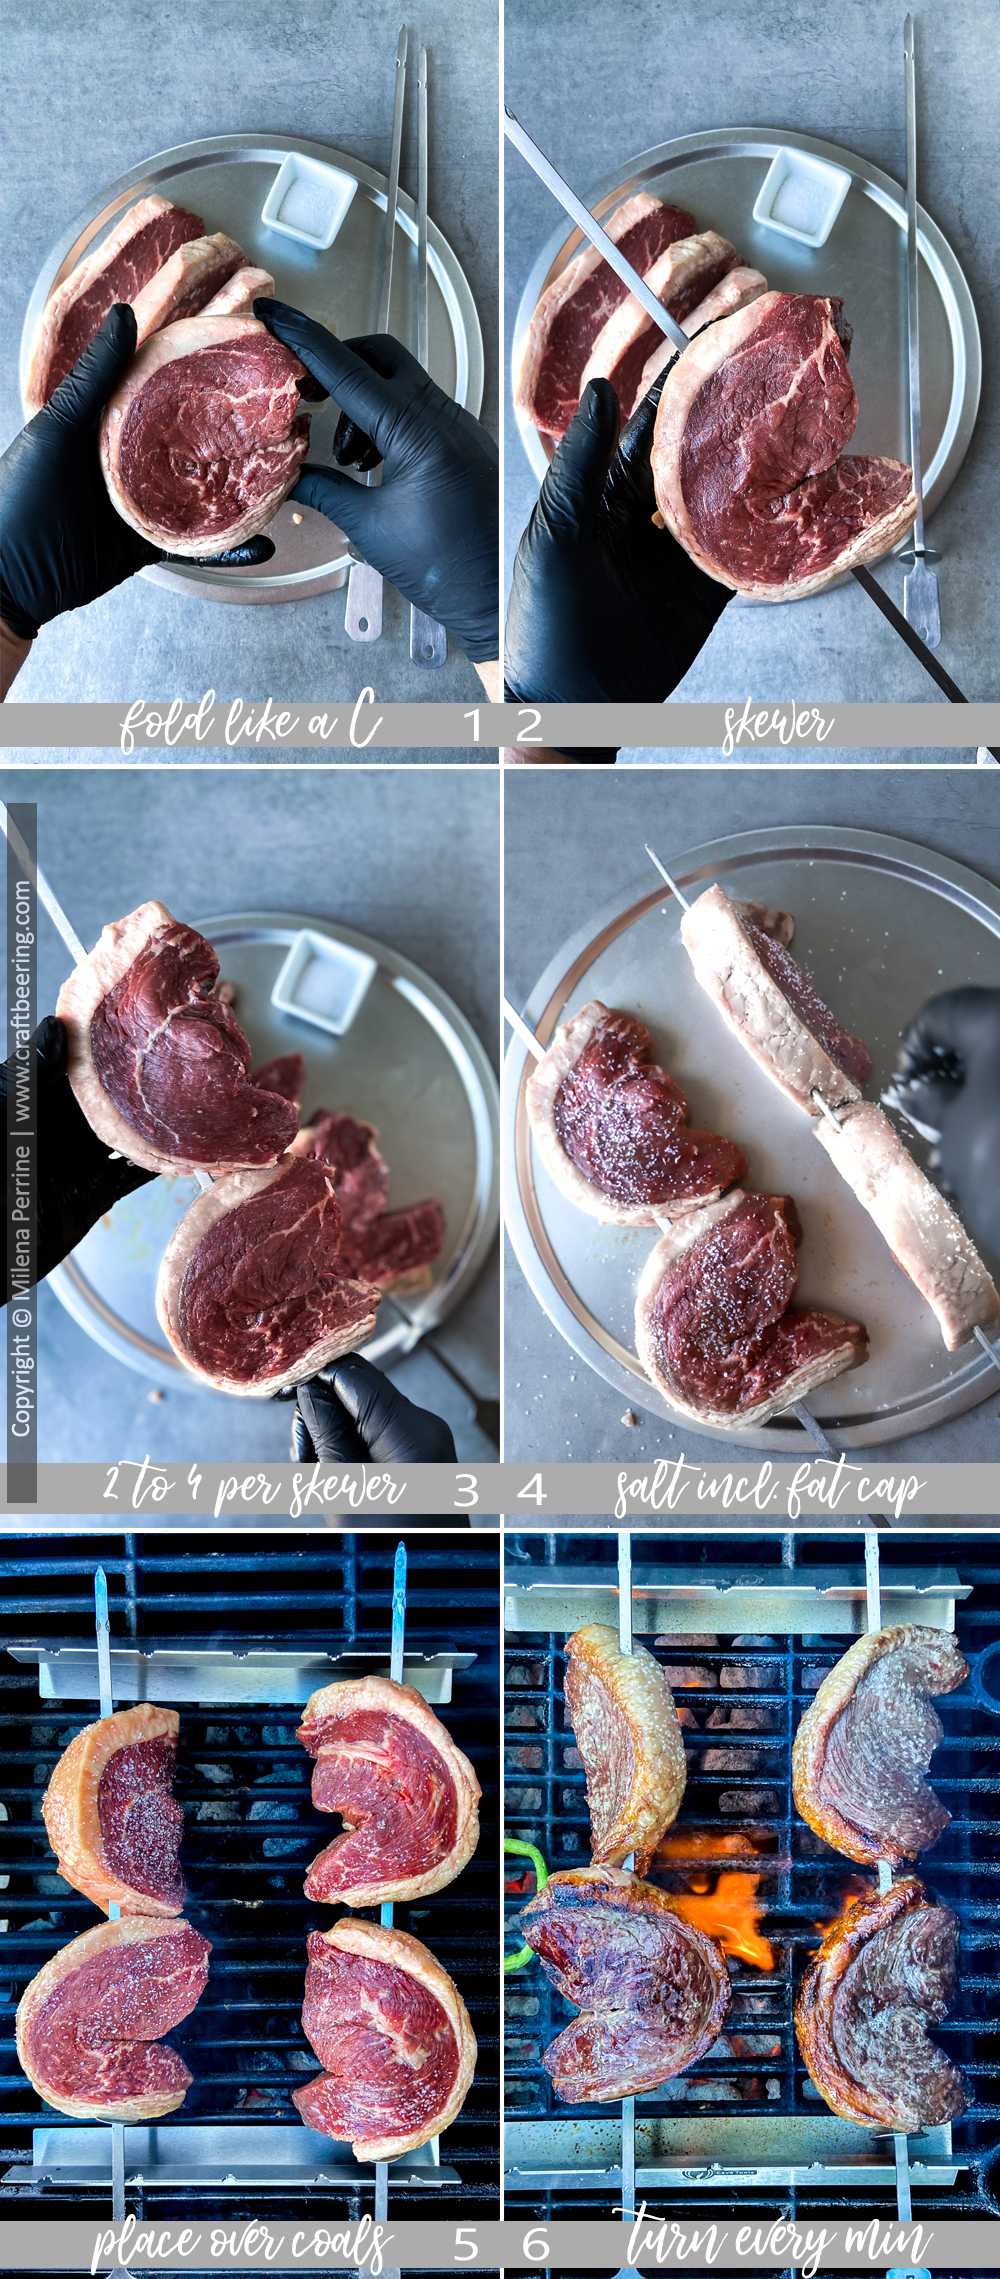 How to cook picanha steak step-by-step.